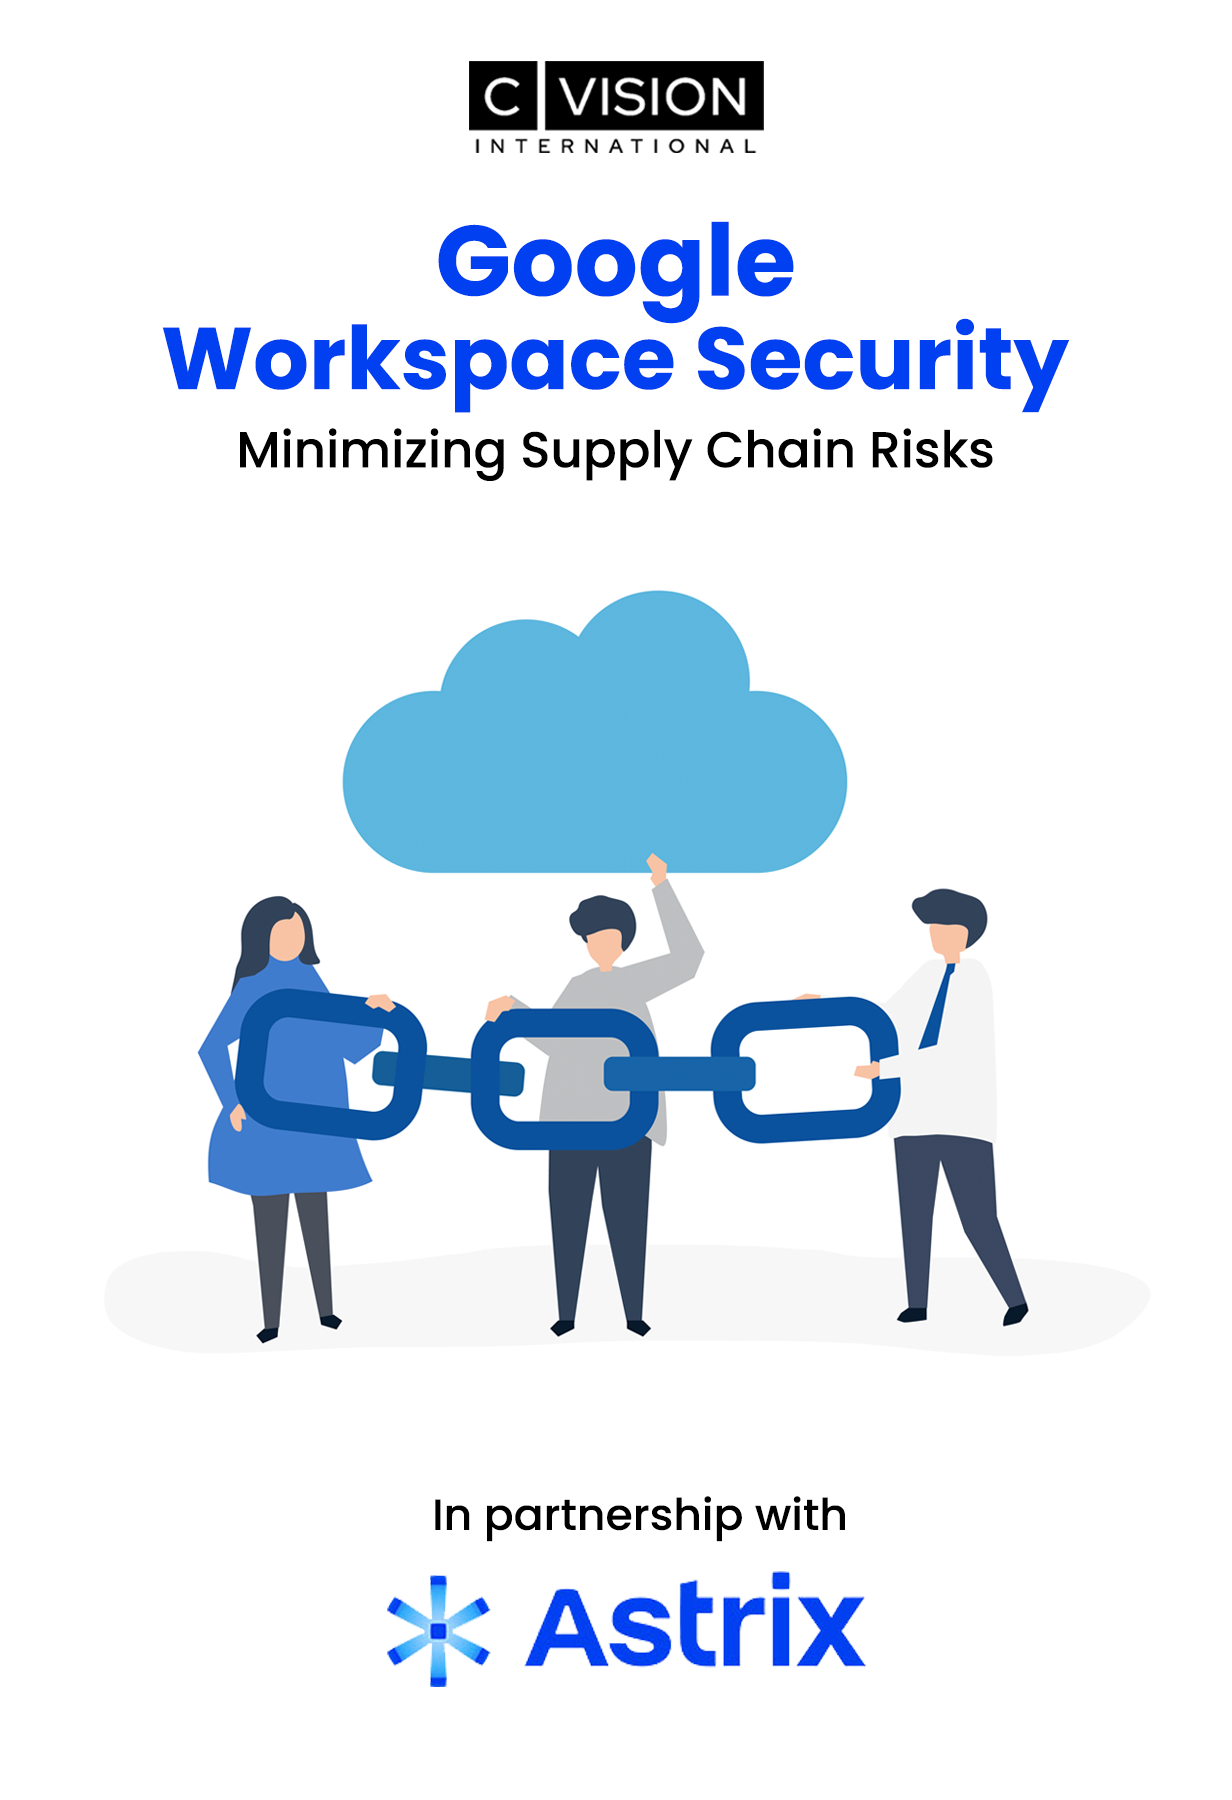 Google Workspace Security - Minimizing Supply Chain Risks